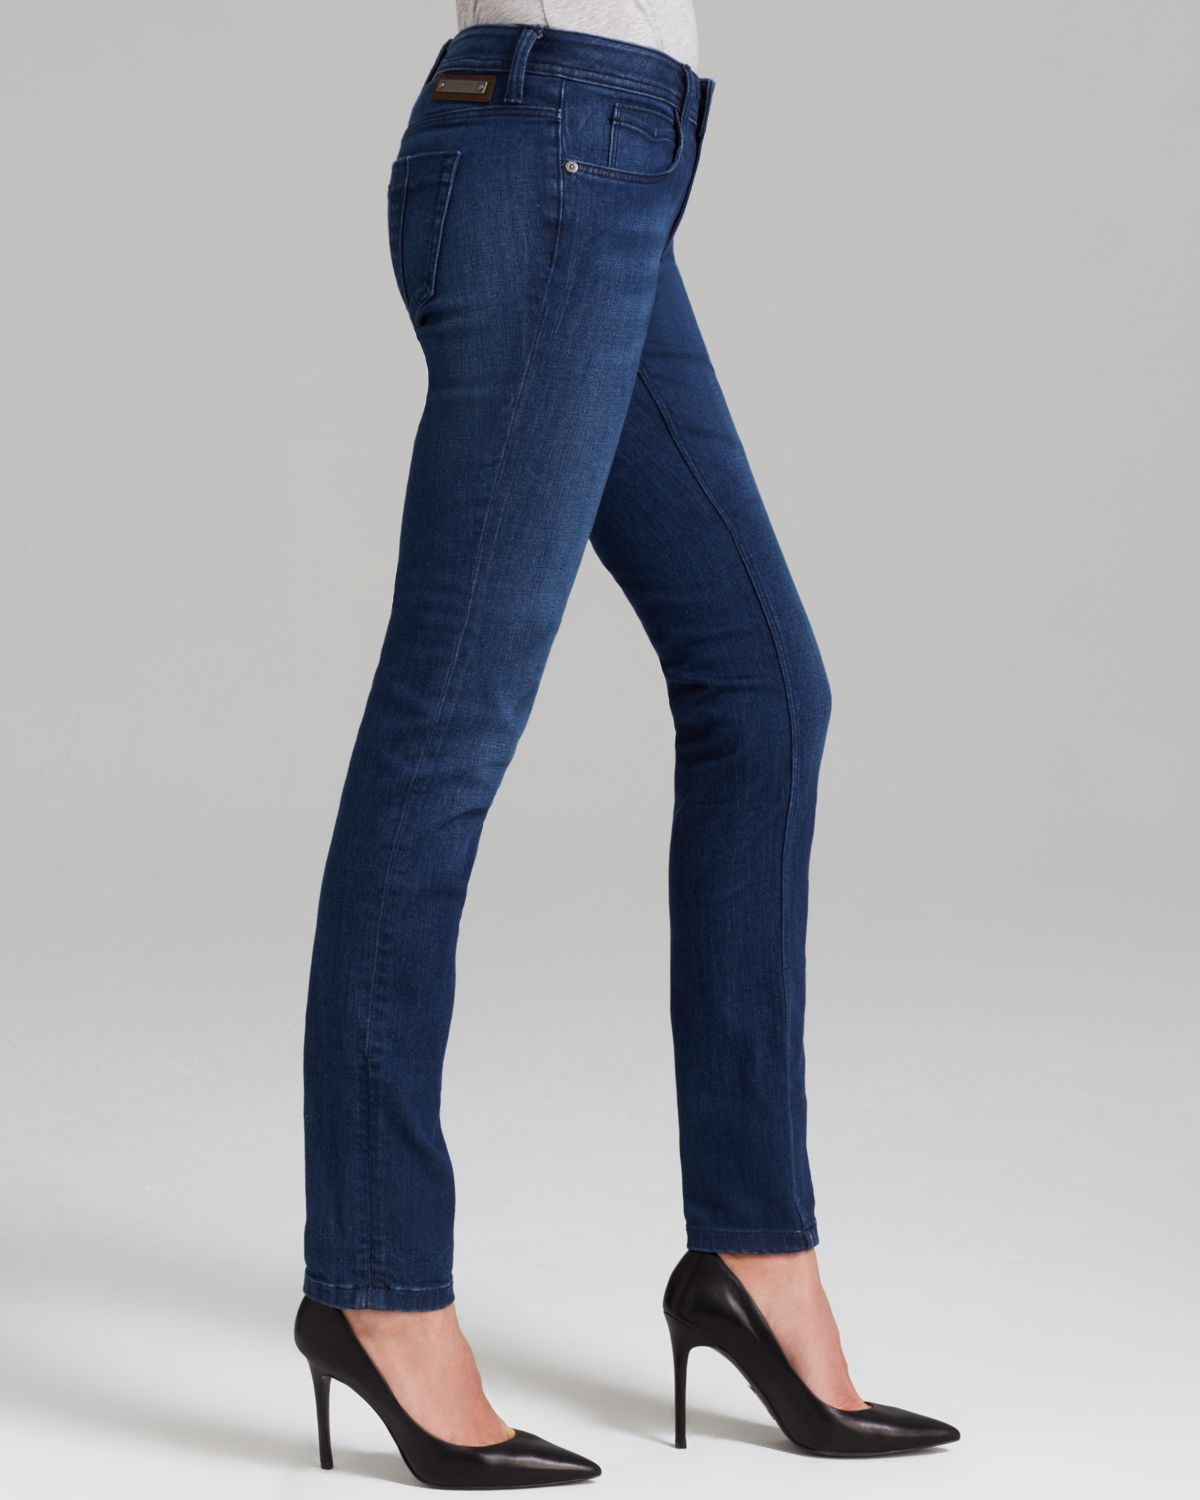 burberry jeans womens 2014